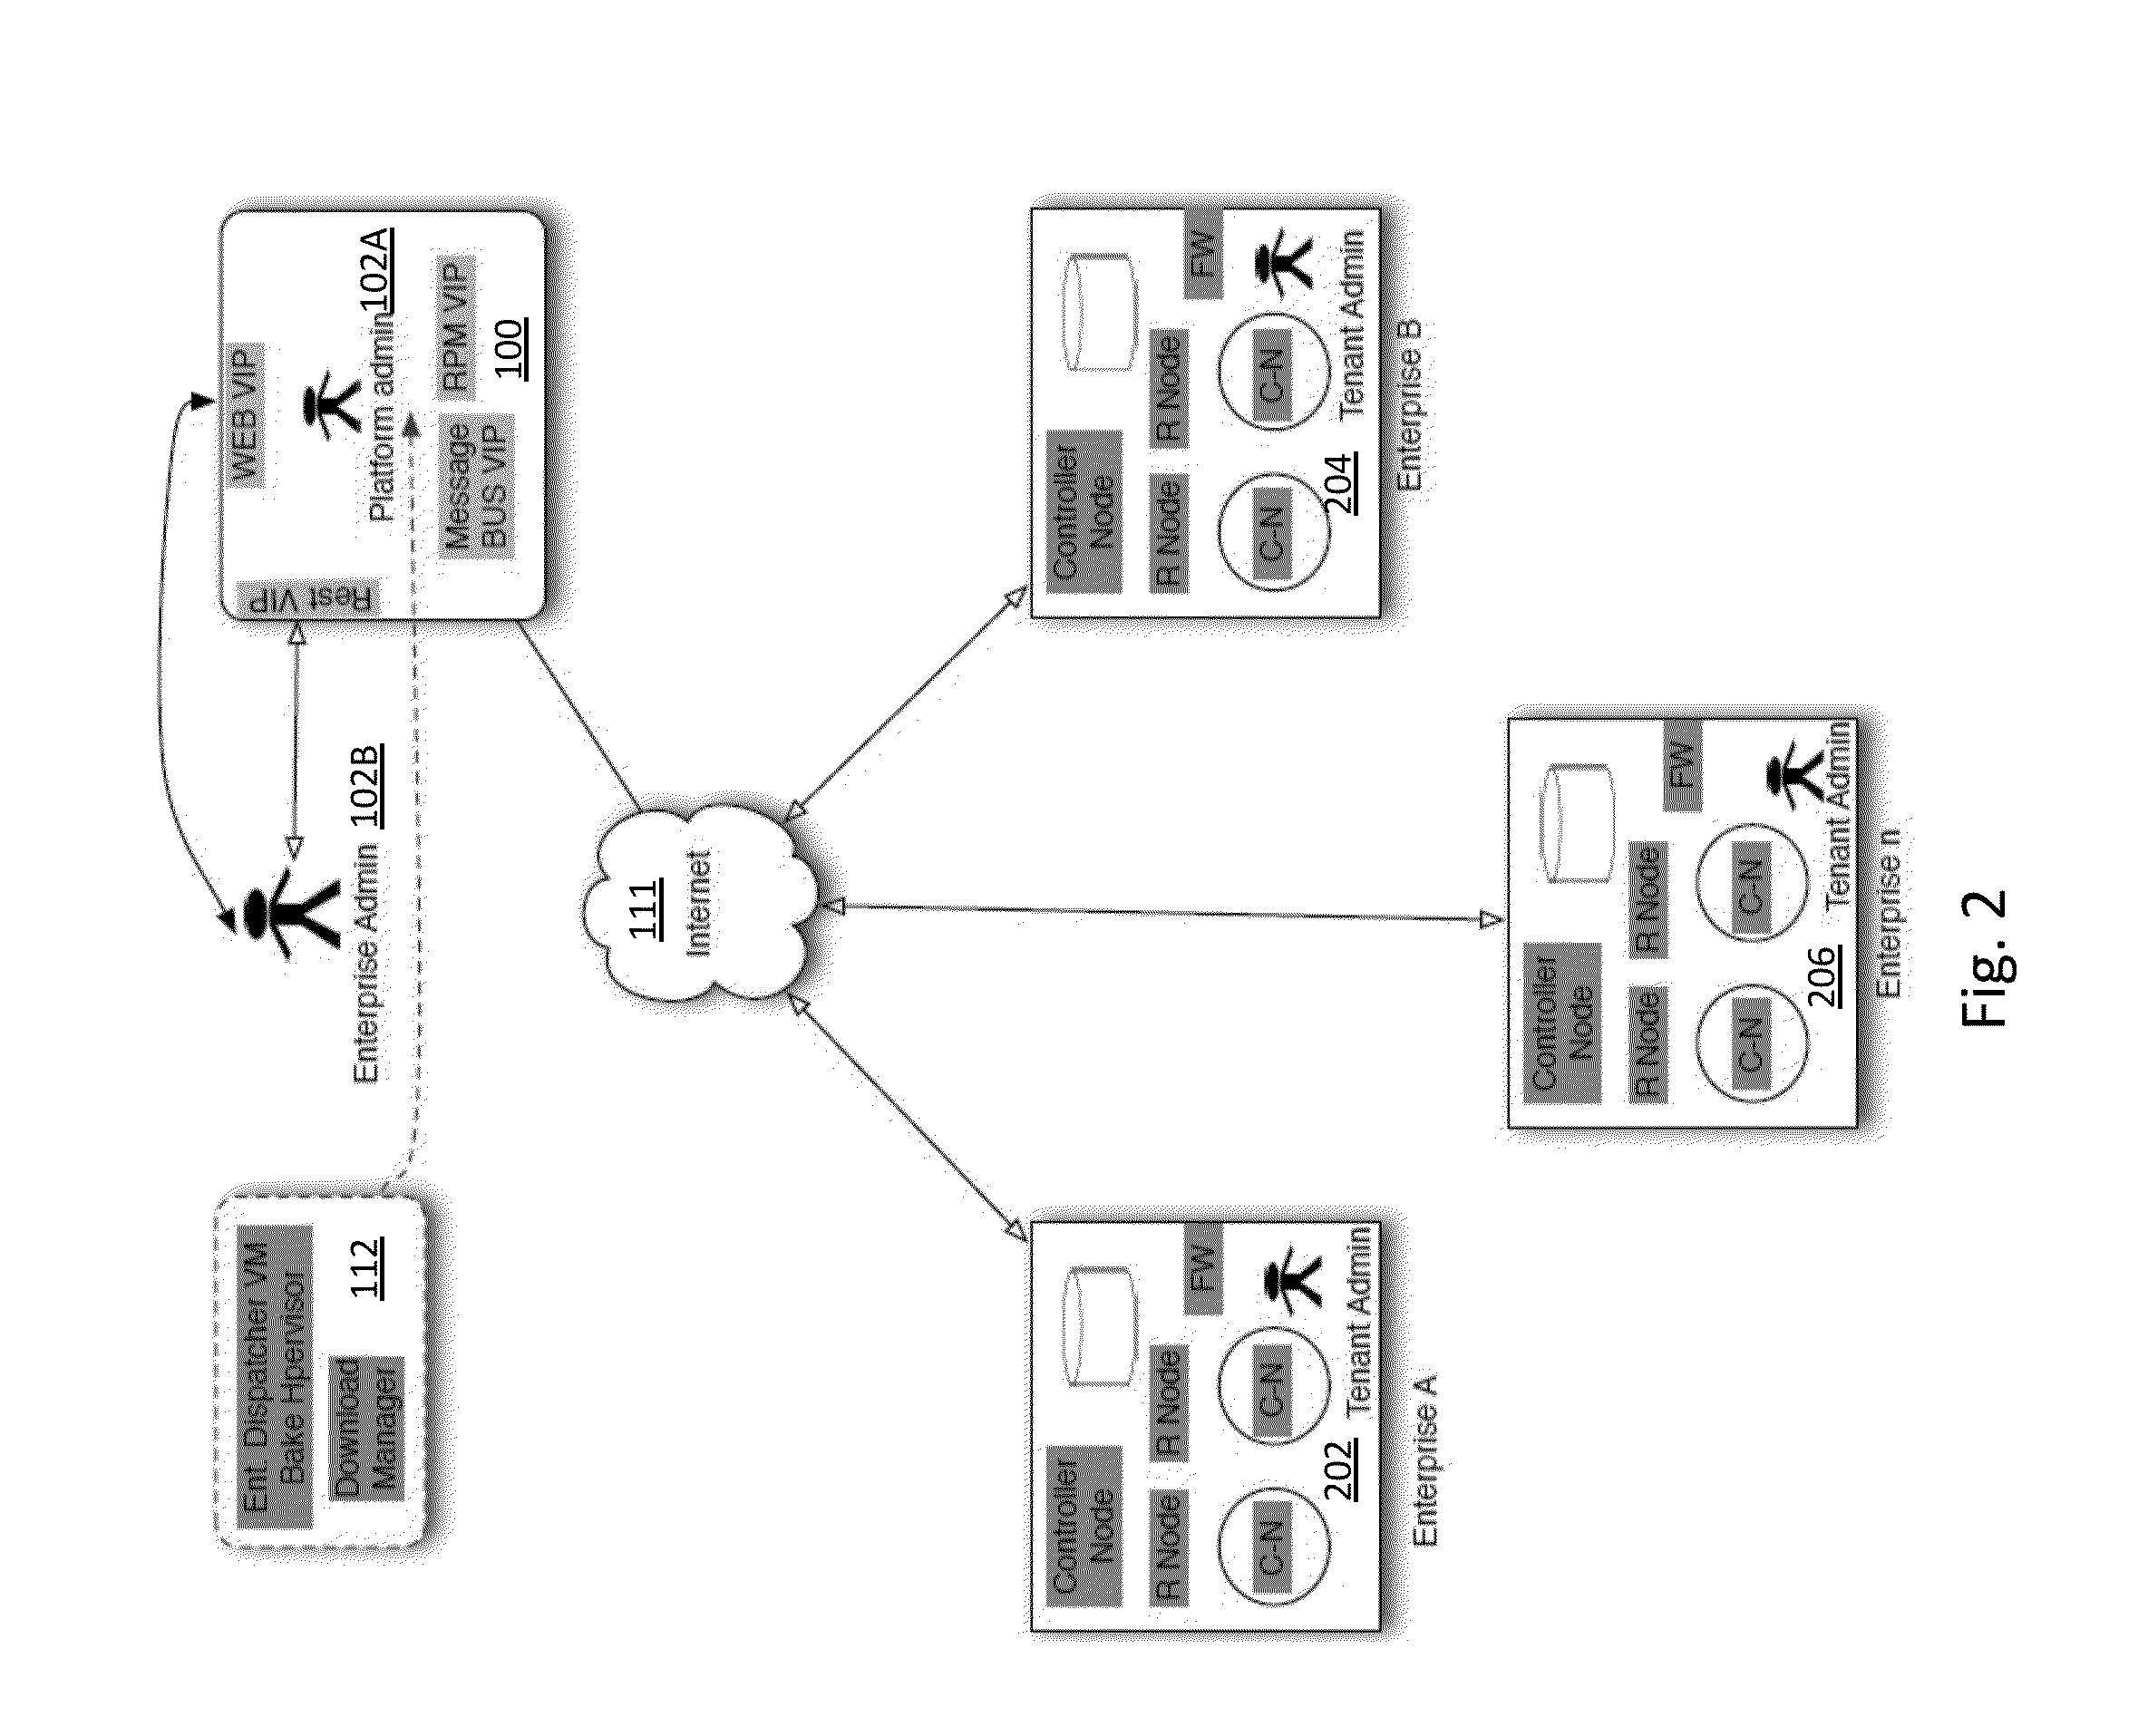 Method and apparatus for processing virtual machine instances in real time event stream for root cause analysis and dynamically suggesting instance remedy